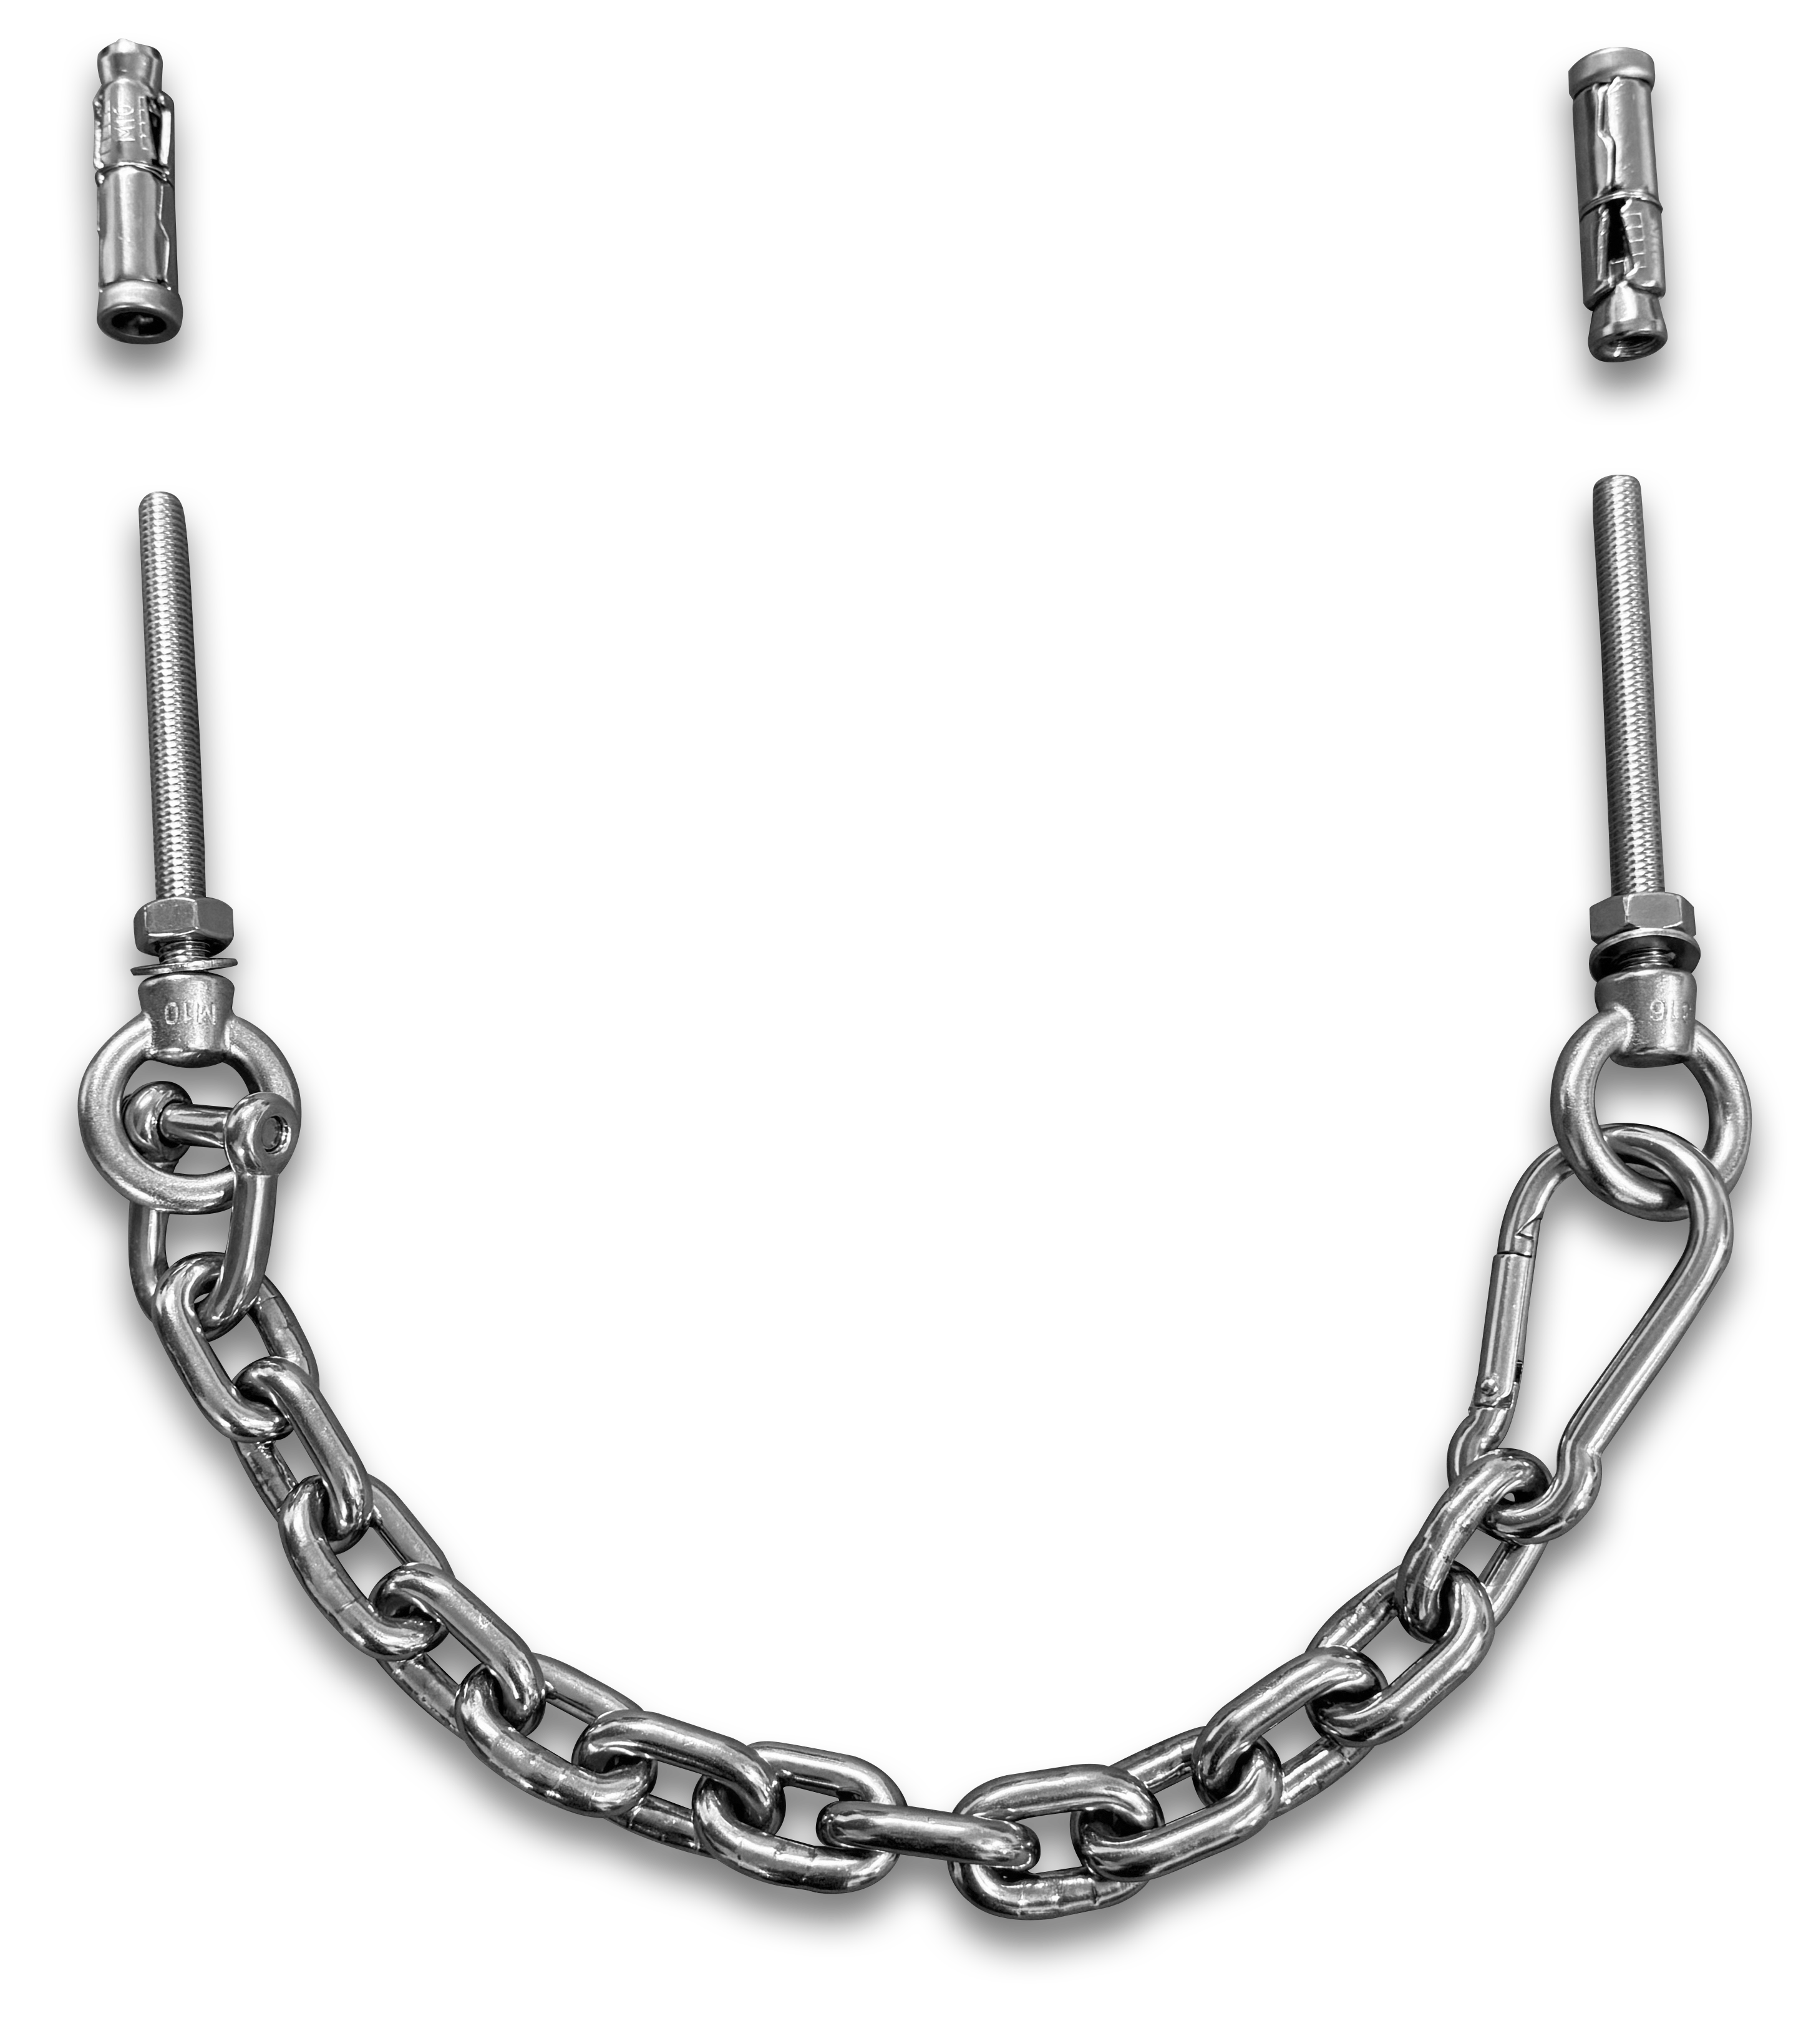 safety Chains